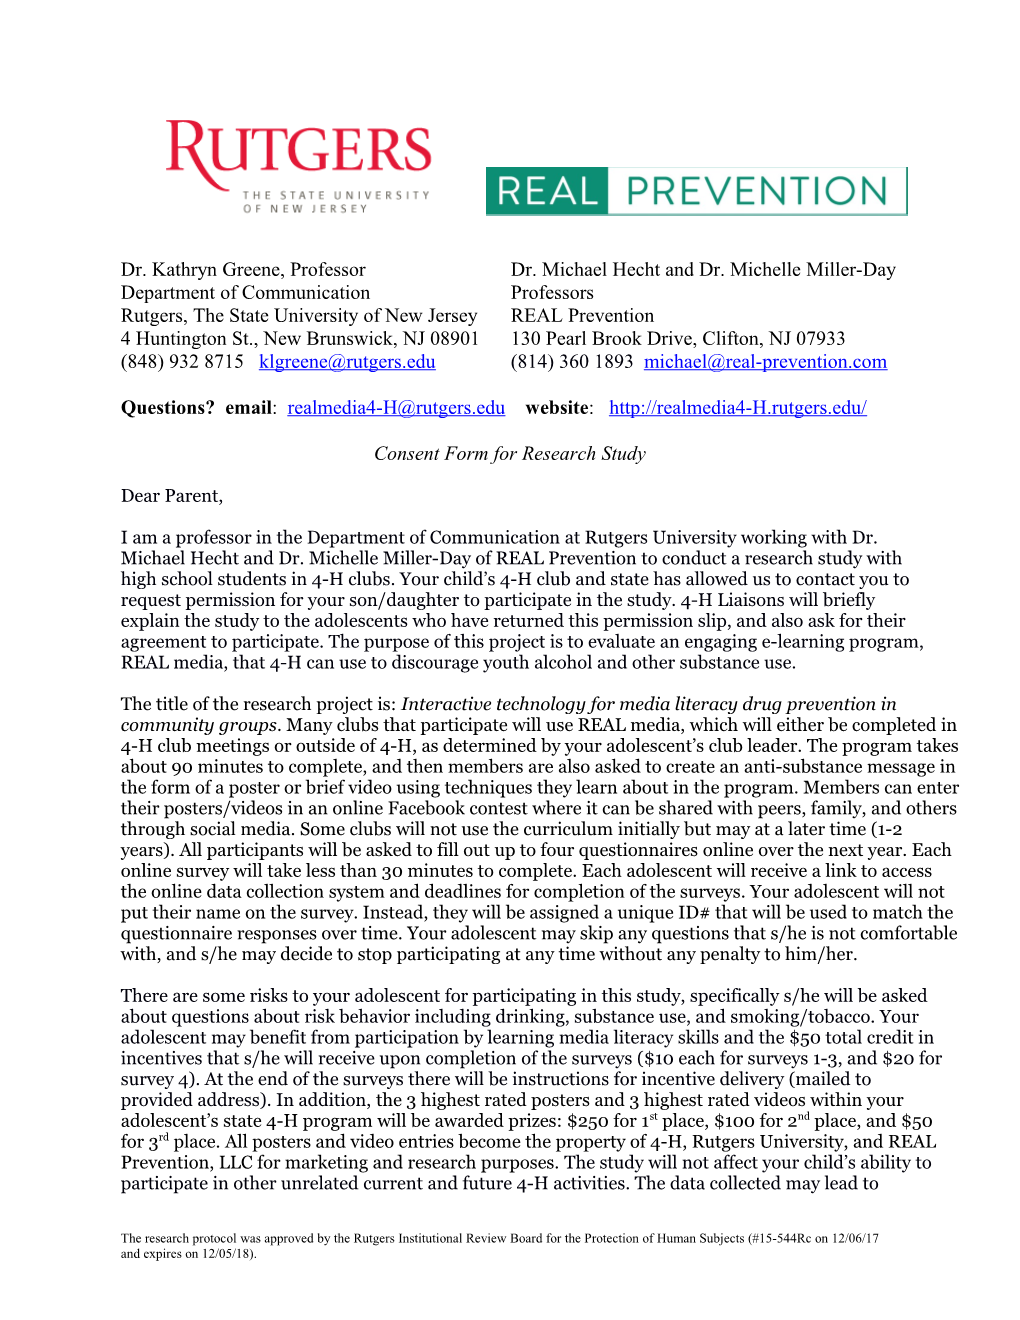 Rutgers, the State University of New Jersey REAL Prevention